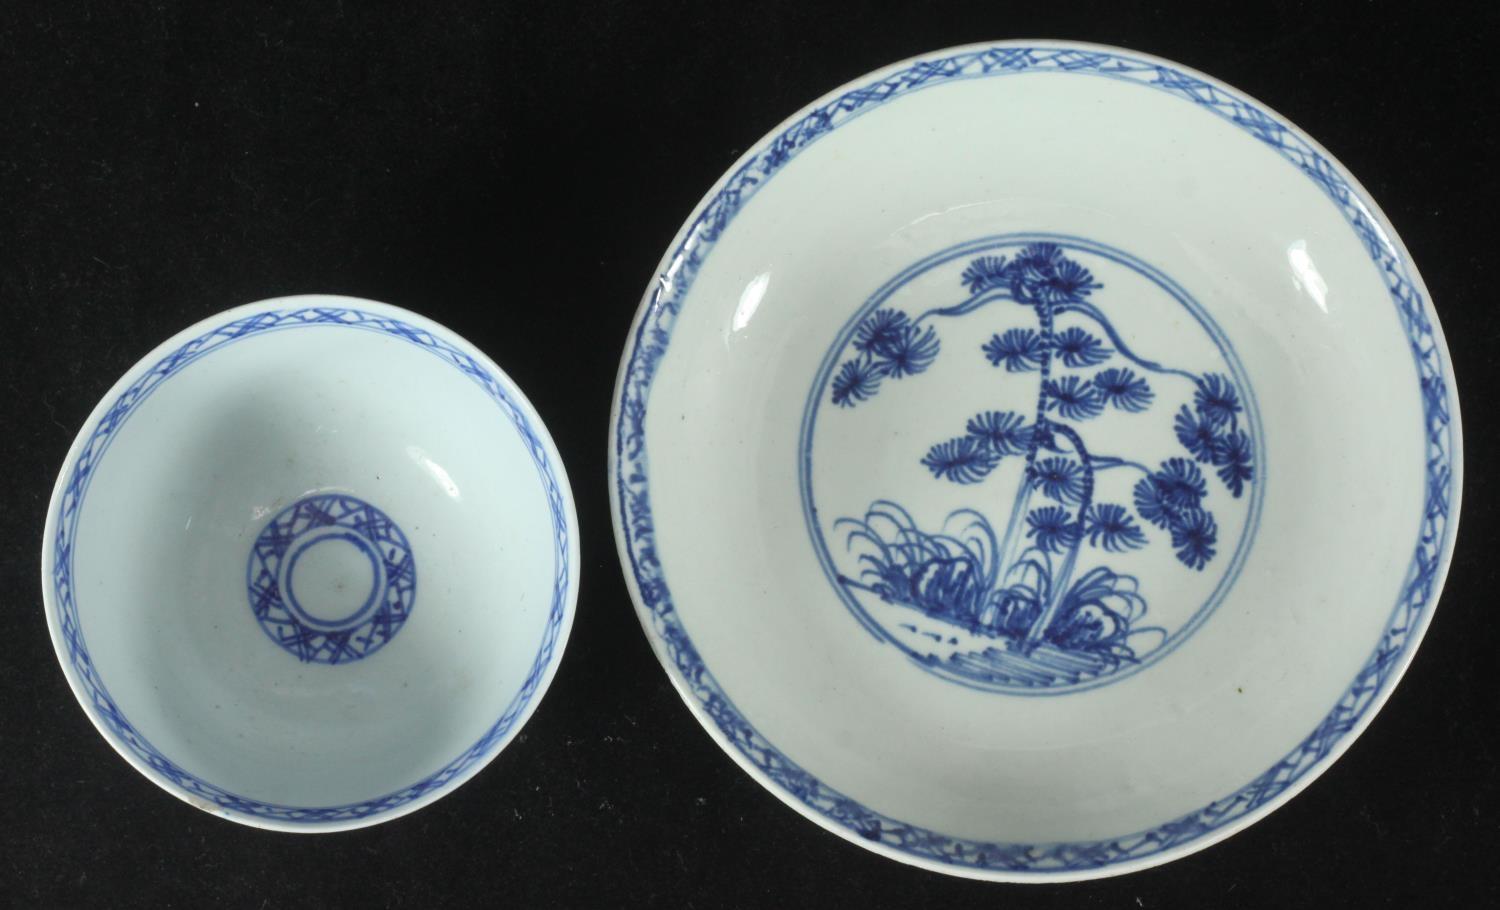 A William Ball Liverpool Porcelain tea bowl and matching saucer, decorated with pine trees and - Image 2 of 3